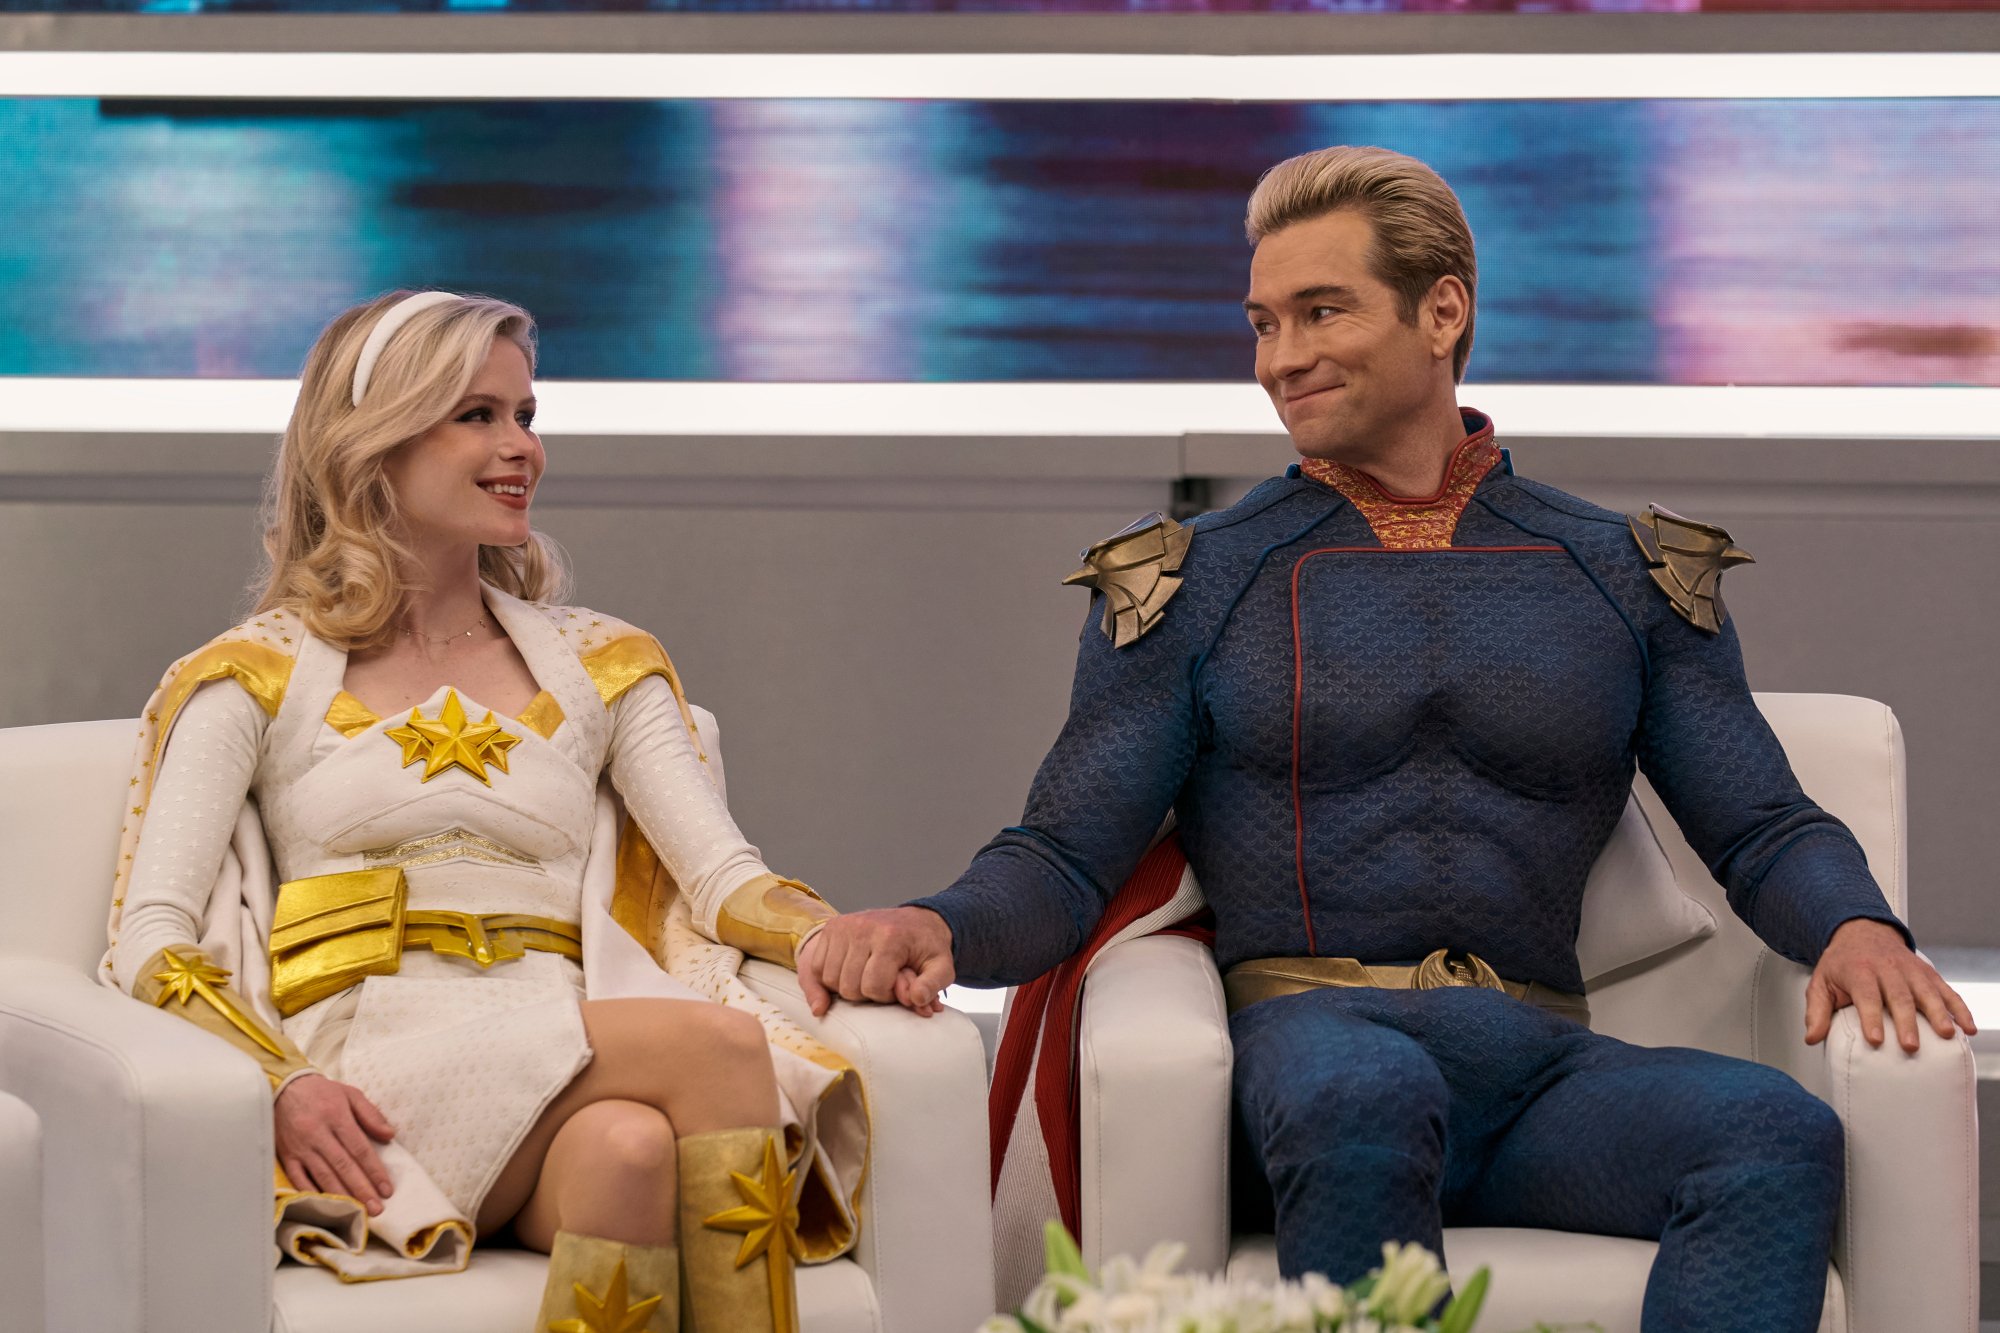 Erin Moriarty and Antony Starr as Starlight and Homelander in 'The Boys,' which will get a spinoff series ahead of season 4. The two are sitting next to one another in white armchairs and smiling. Homelander is holding Starlight's hand.